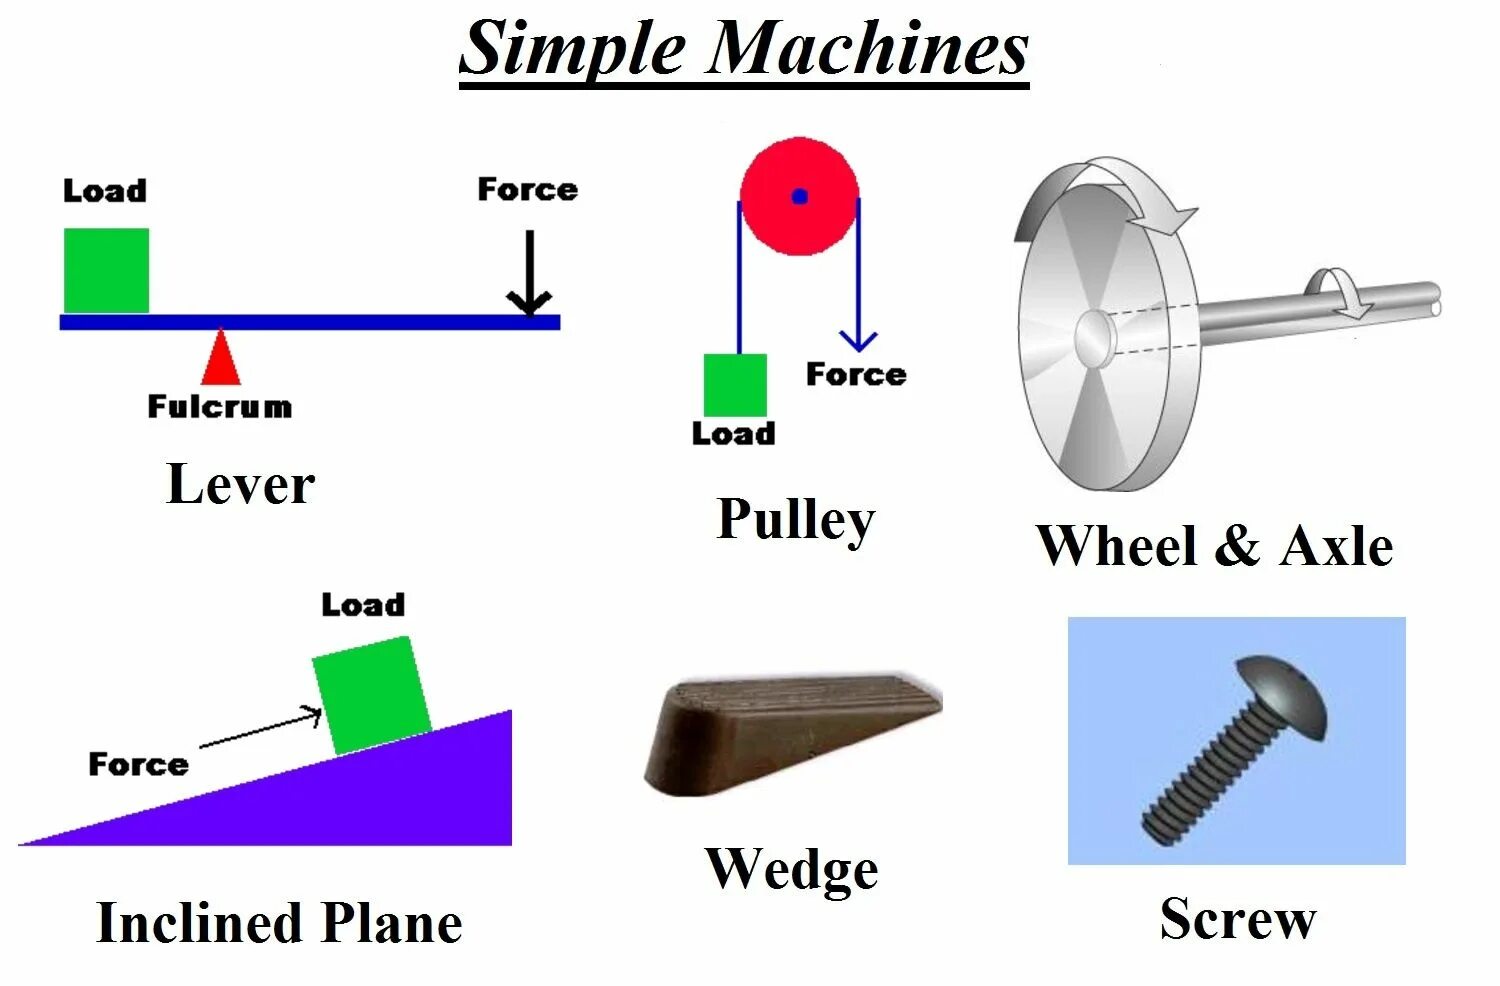 Simple Machine. Simple mechanisms. Simple Machines example. Простые механизмы. Show difference